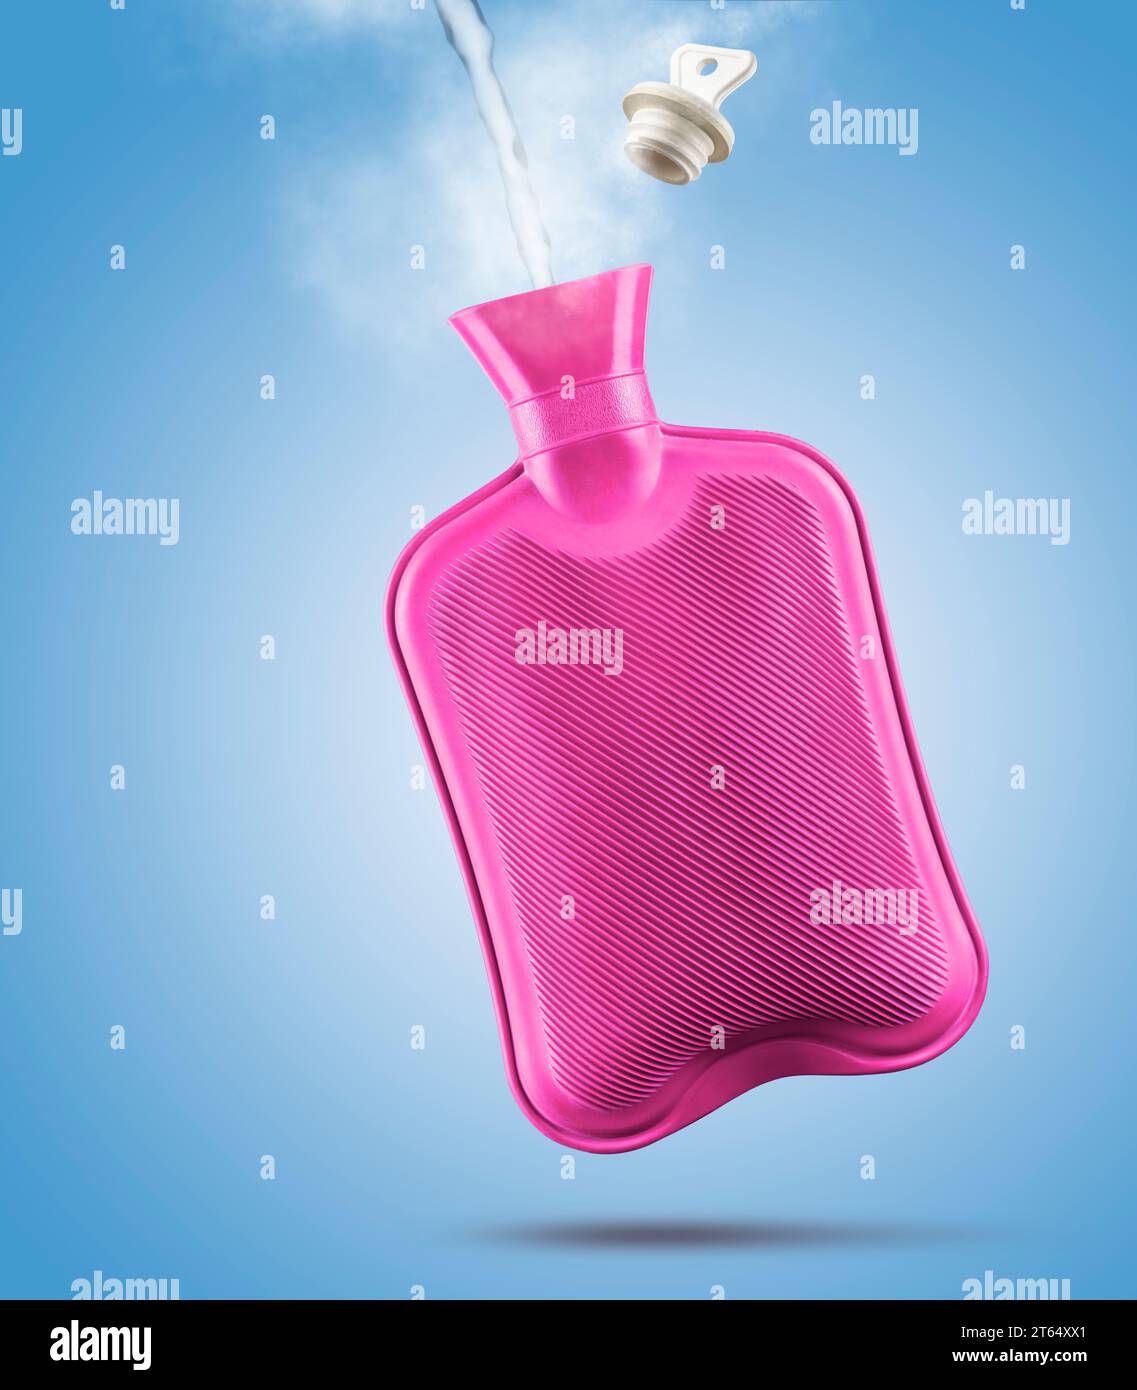 Filling hot water bottle with steam and stopper on blue background. Stock Photo